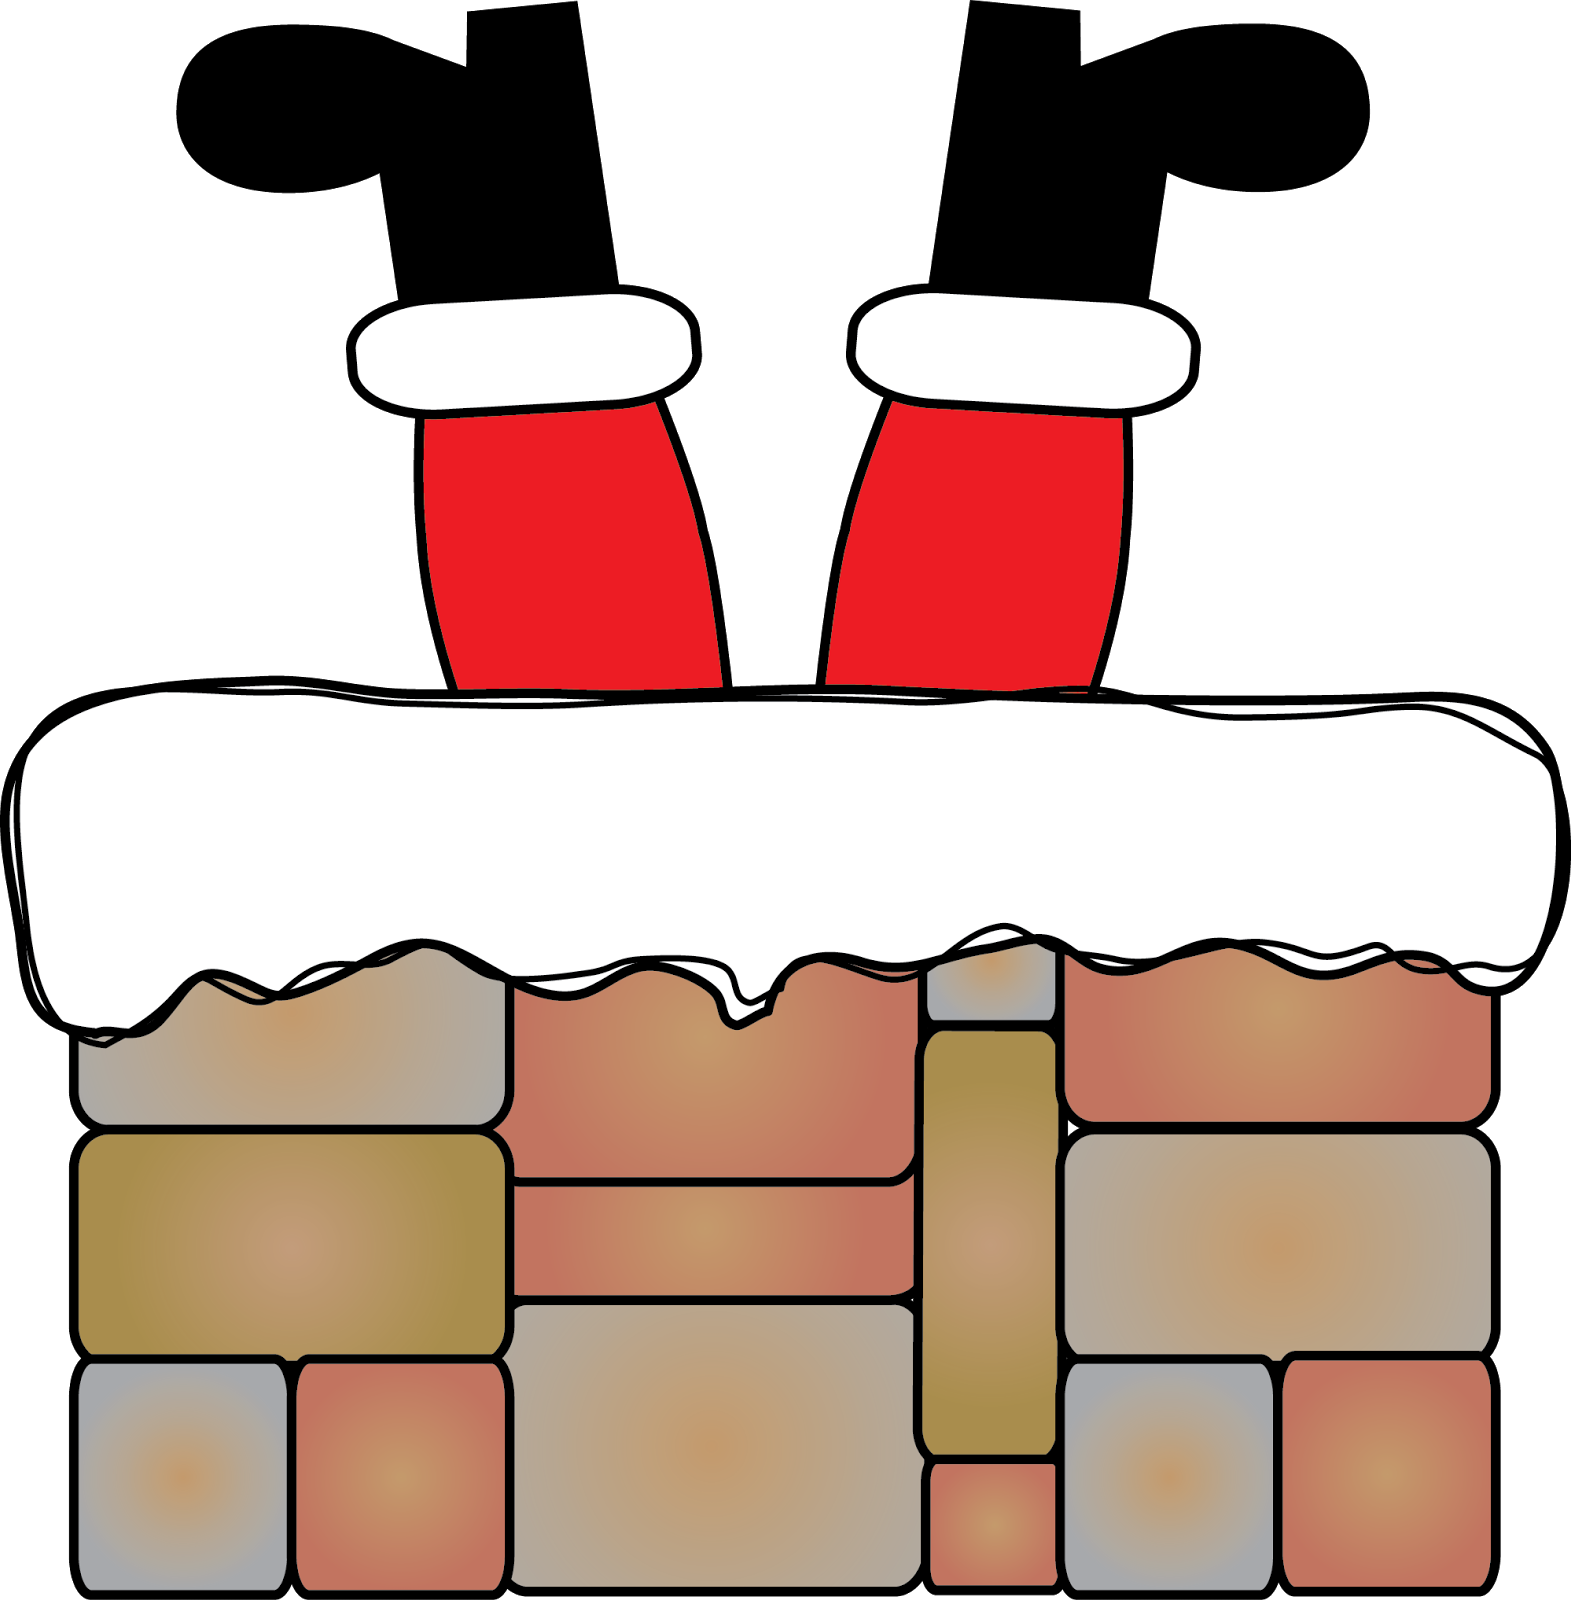 fireplace clipart old fashioned